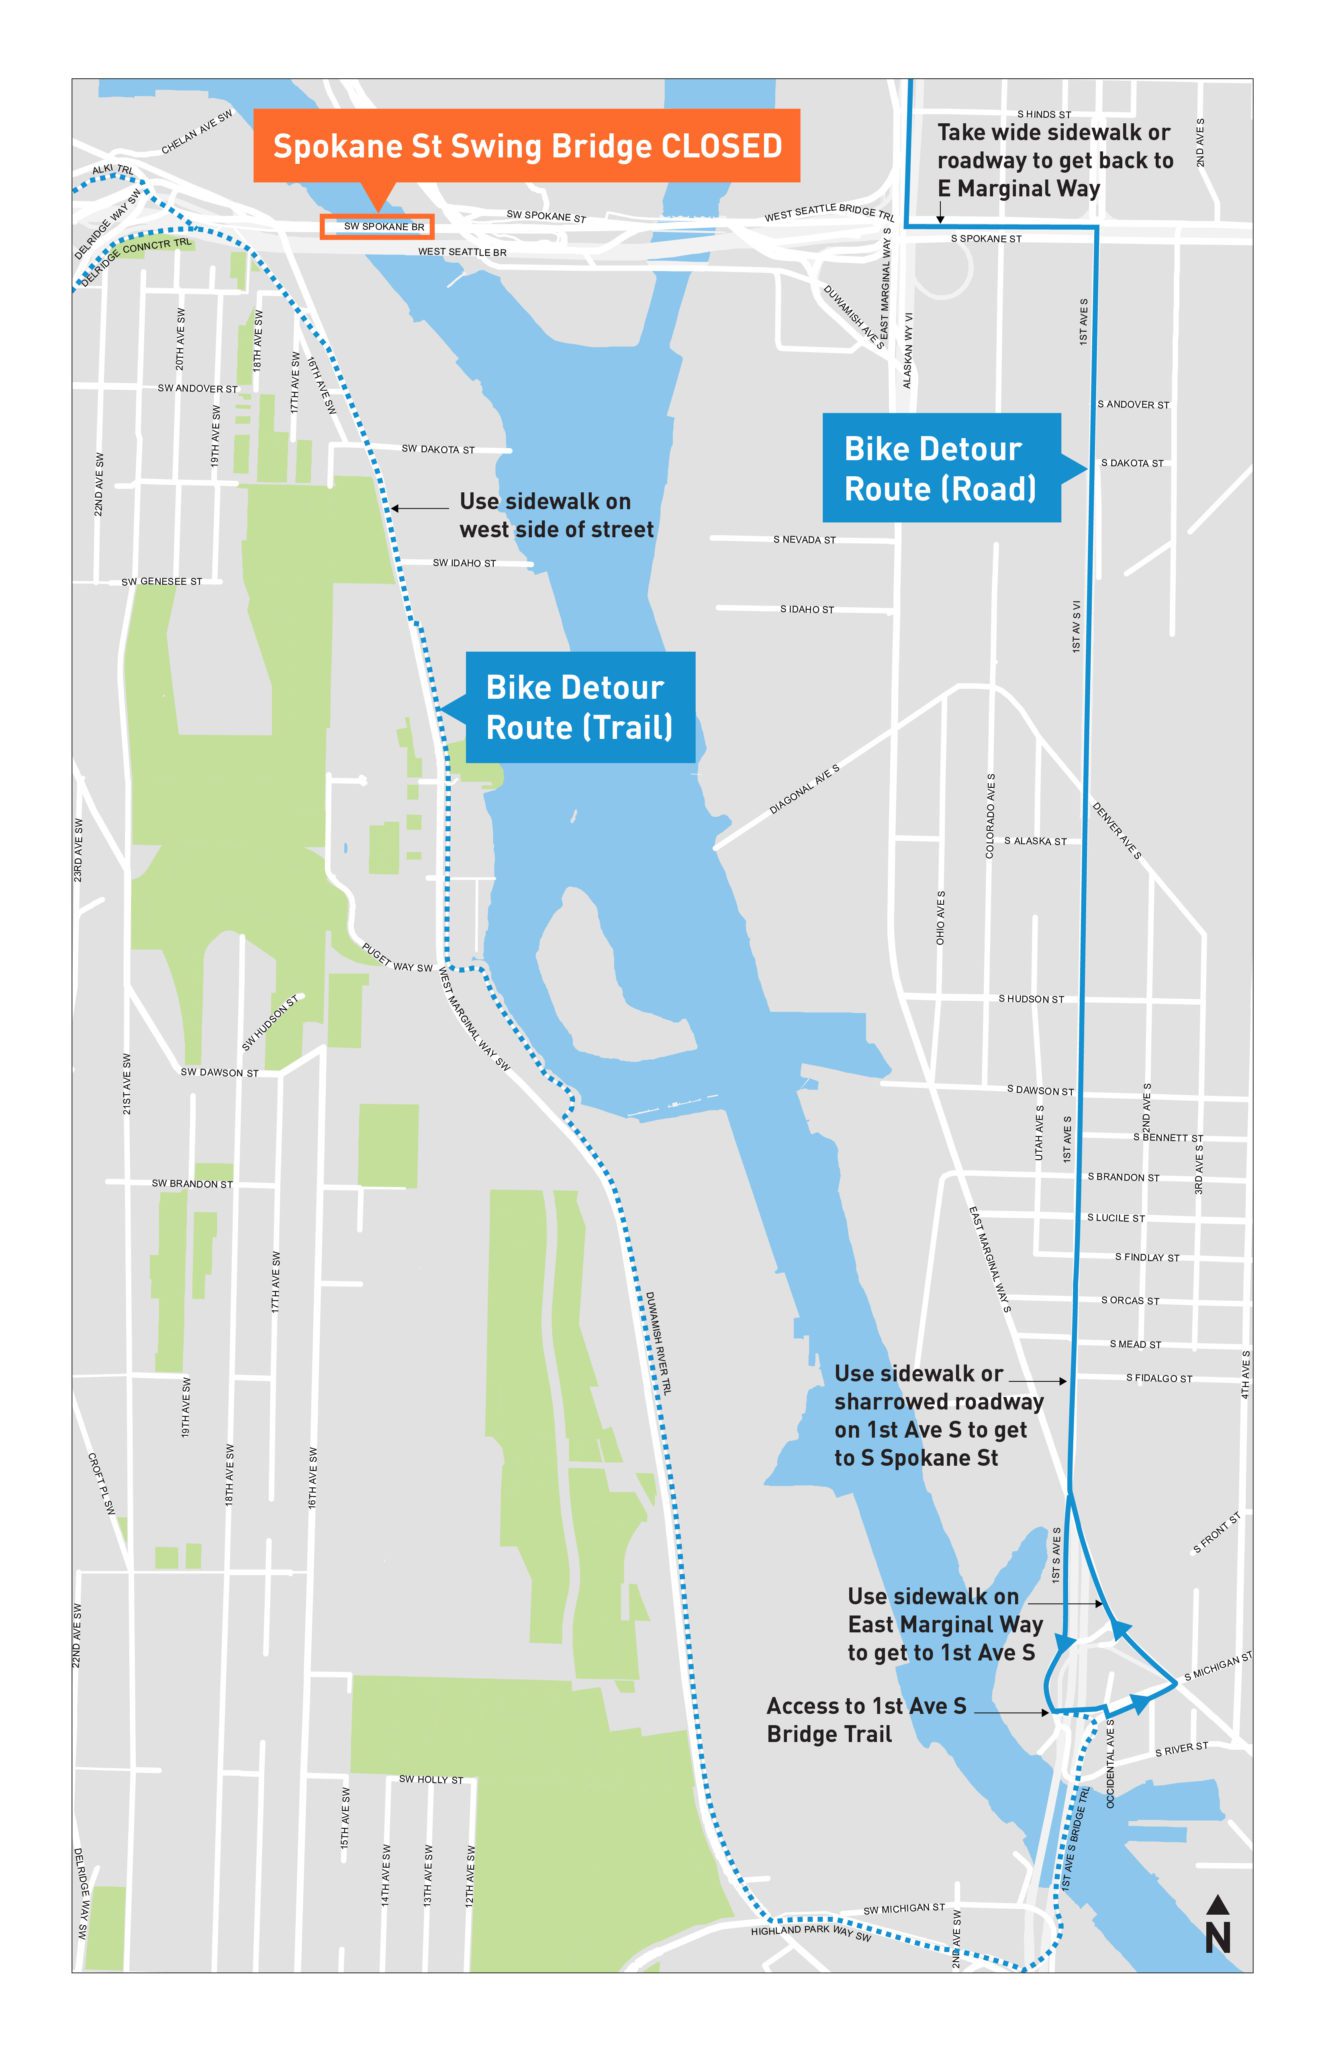 The bike detour route during the Spokane St Swing Bridge closure. The route travels on the west side of the Duwamish Waterway and crosses over the 1st Ave S Bridge, then continues on the east side of the waterway.